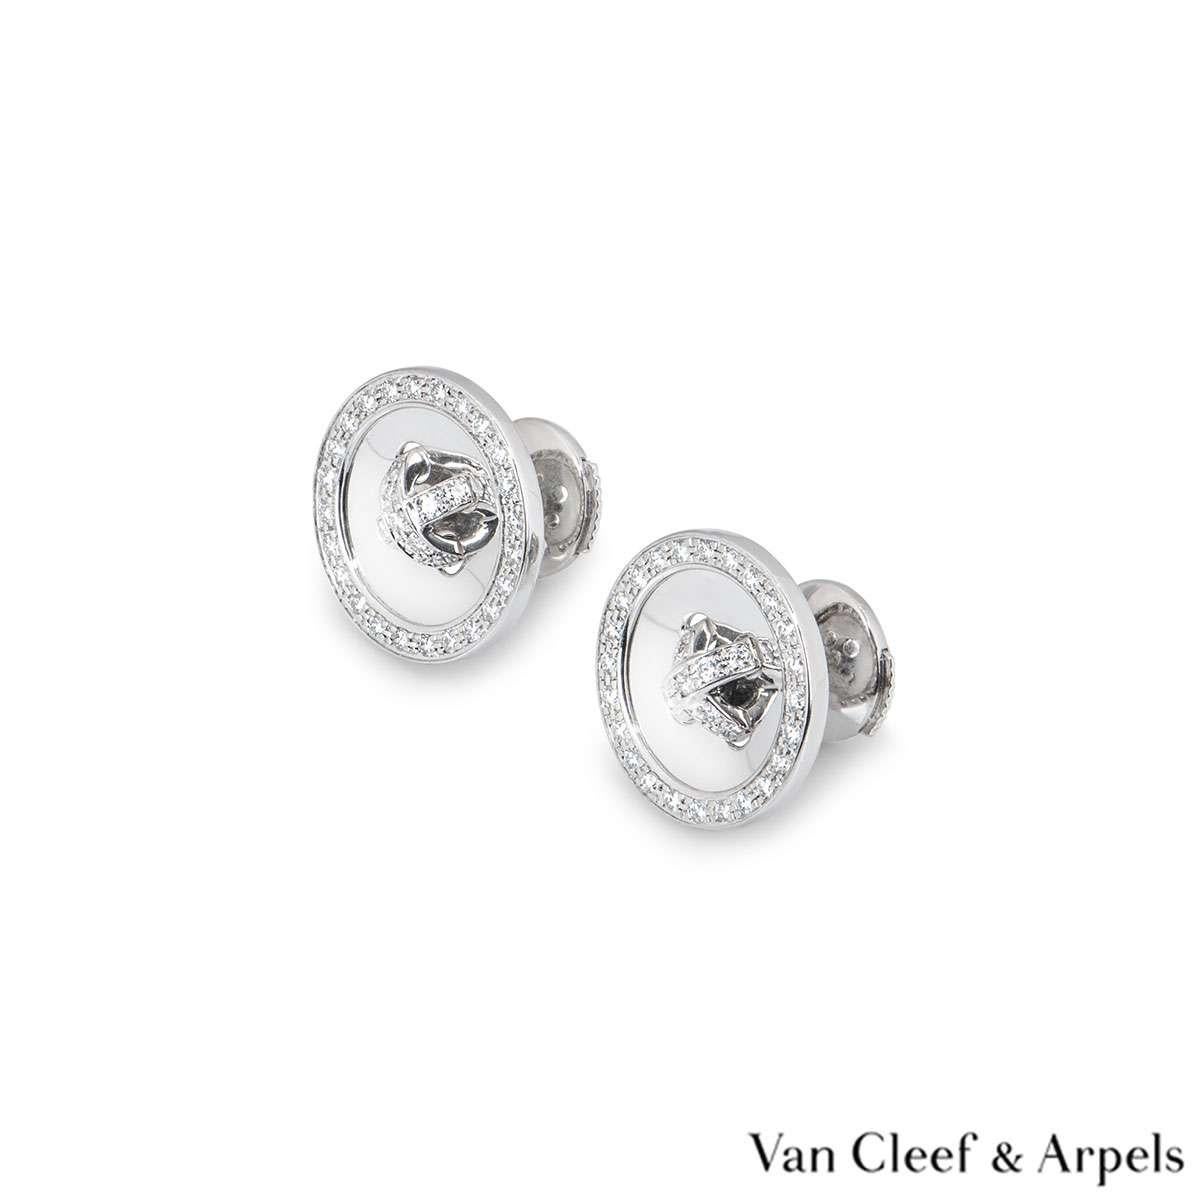 A pair of 18 carat white gold diamond earrings by Van Cleef & Arpels. The button motif earrings are set with round brilliant cut diamonds in the centre and around the outer edge. There are 66 diamonds with a total weight of approximately 0.39